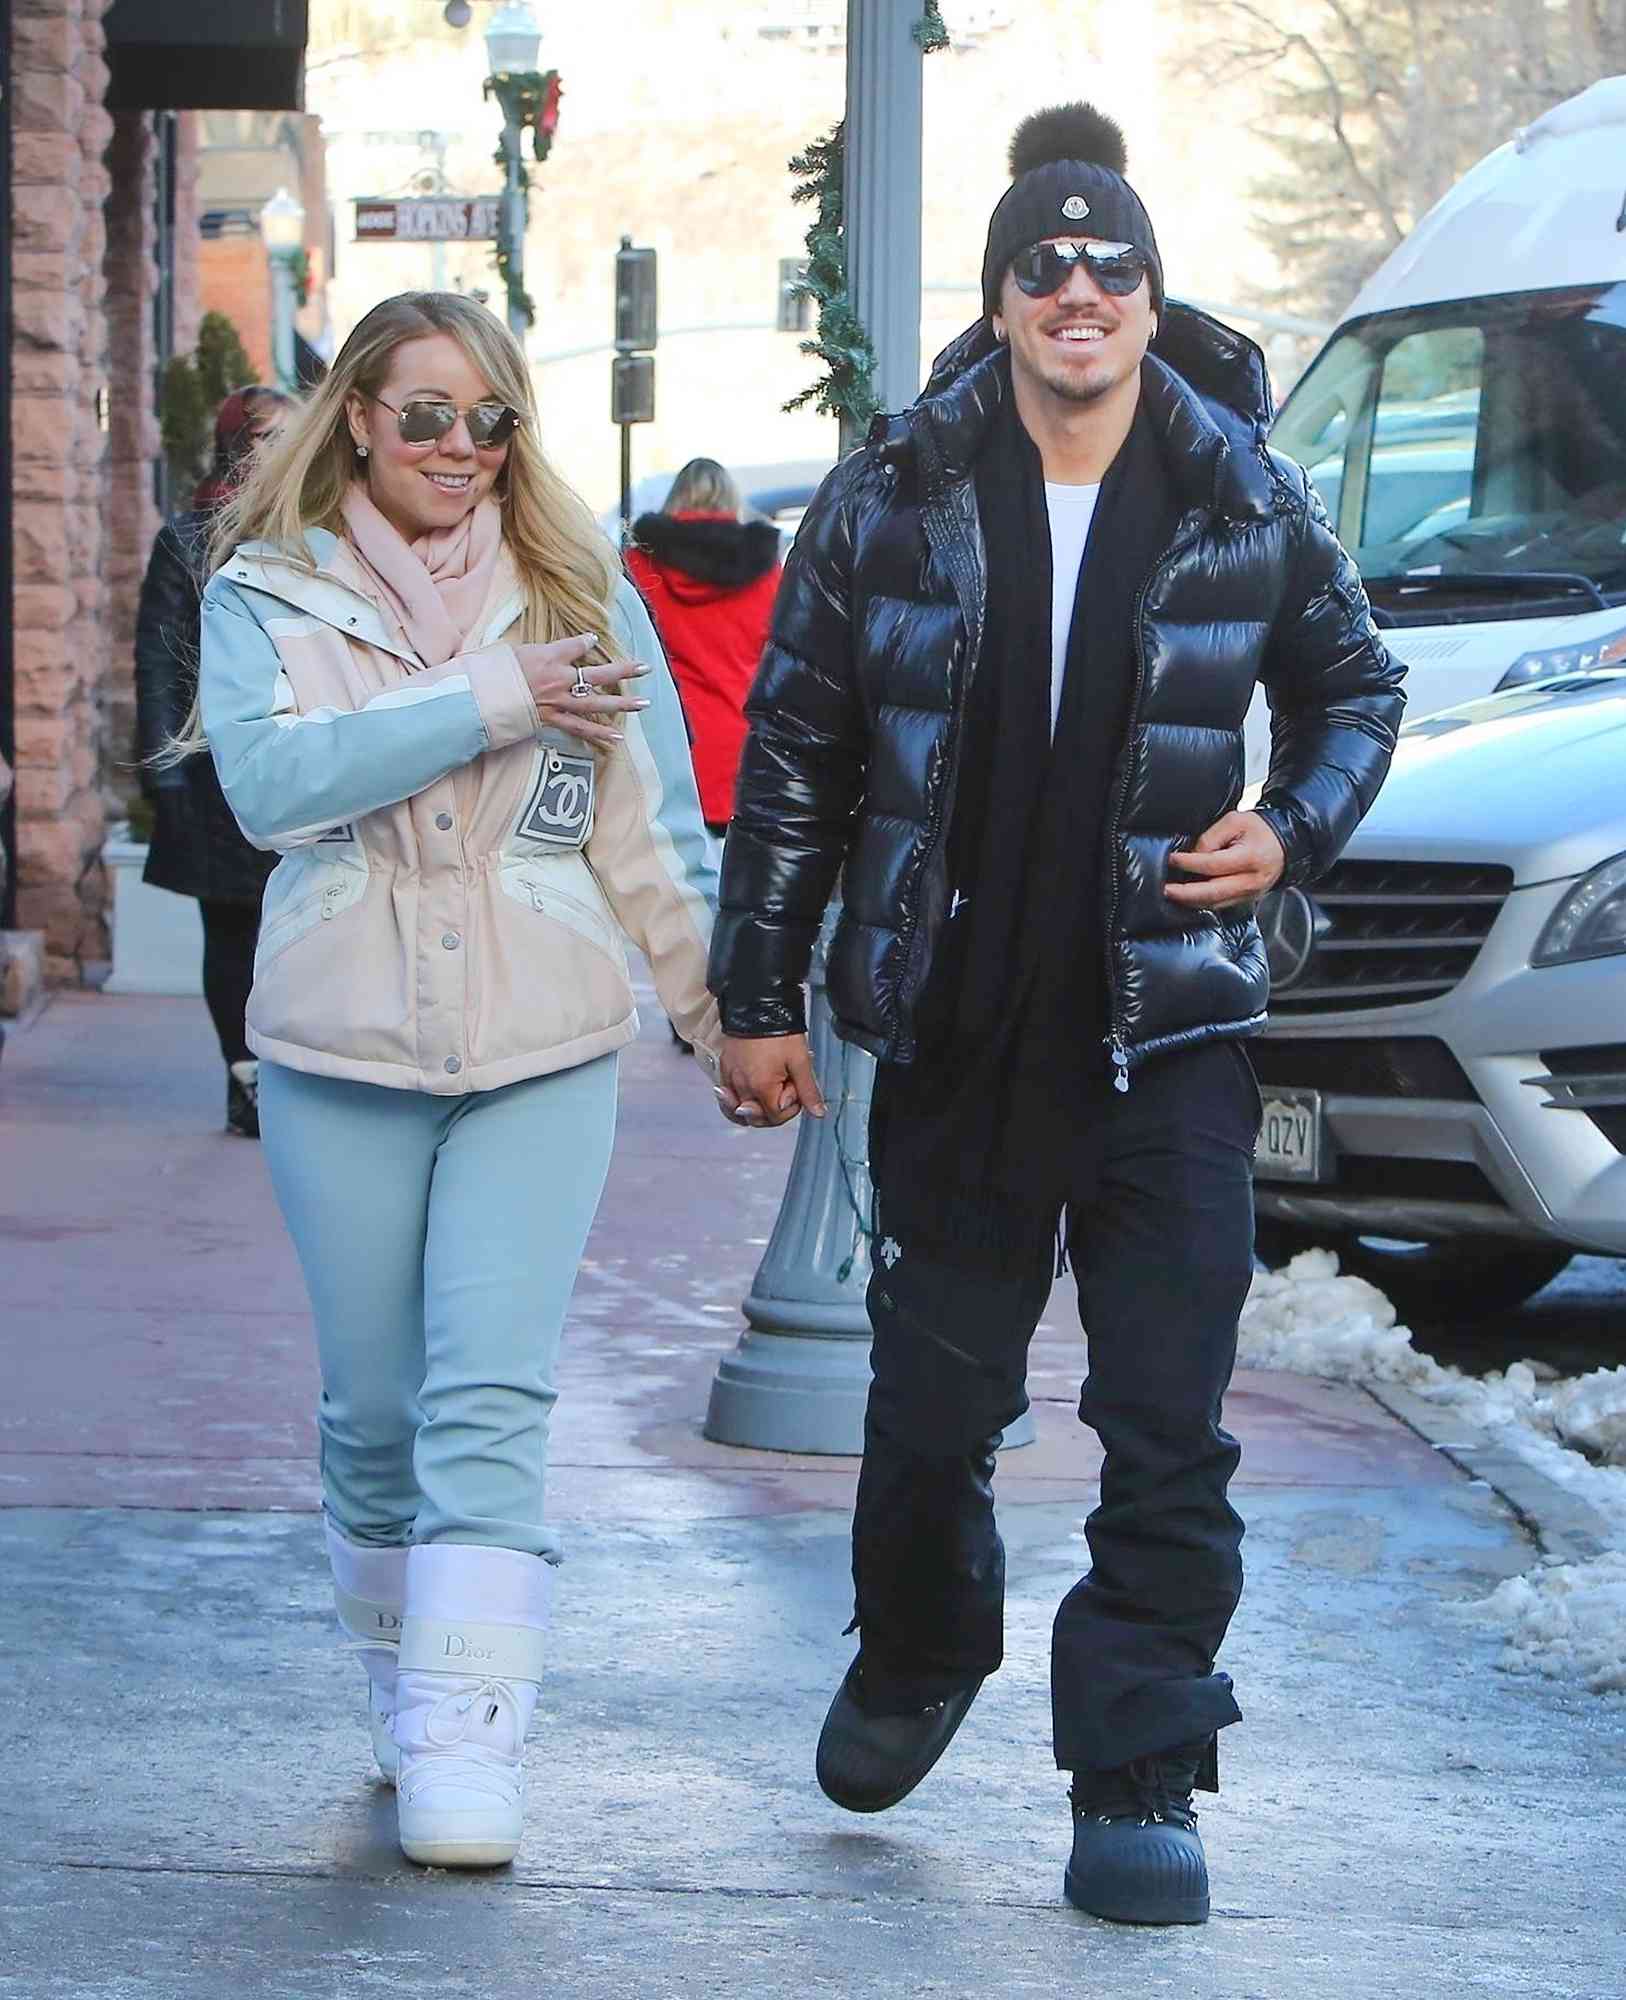 *EXCLUSIVE* Mariah Carey and Bryan Tanaka go for a Winter stroll in Aspen